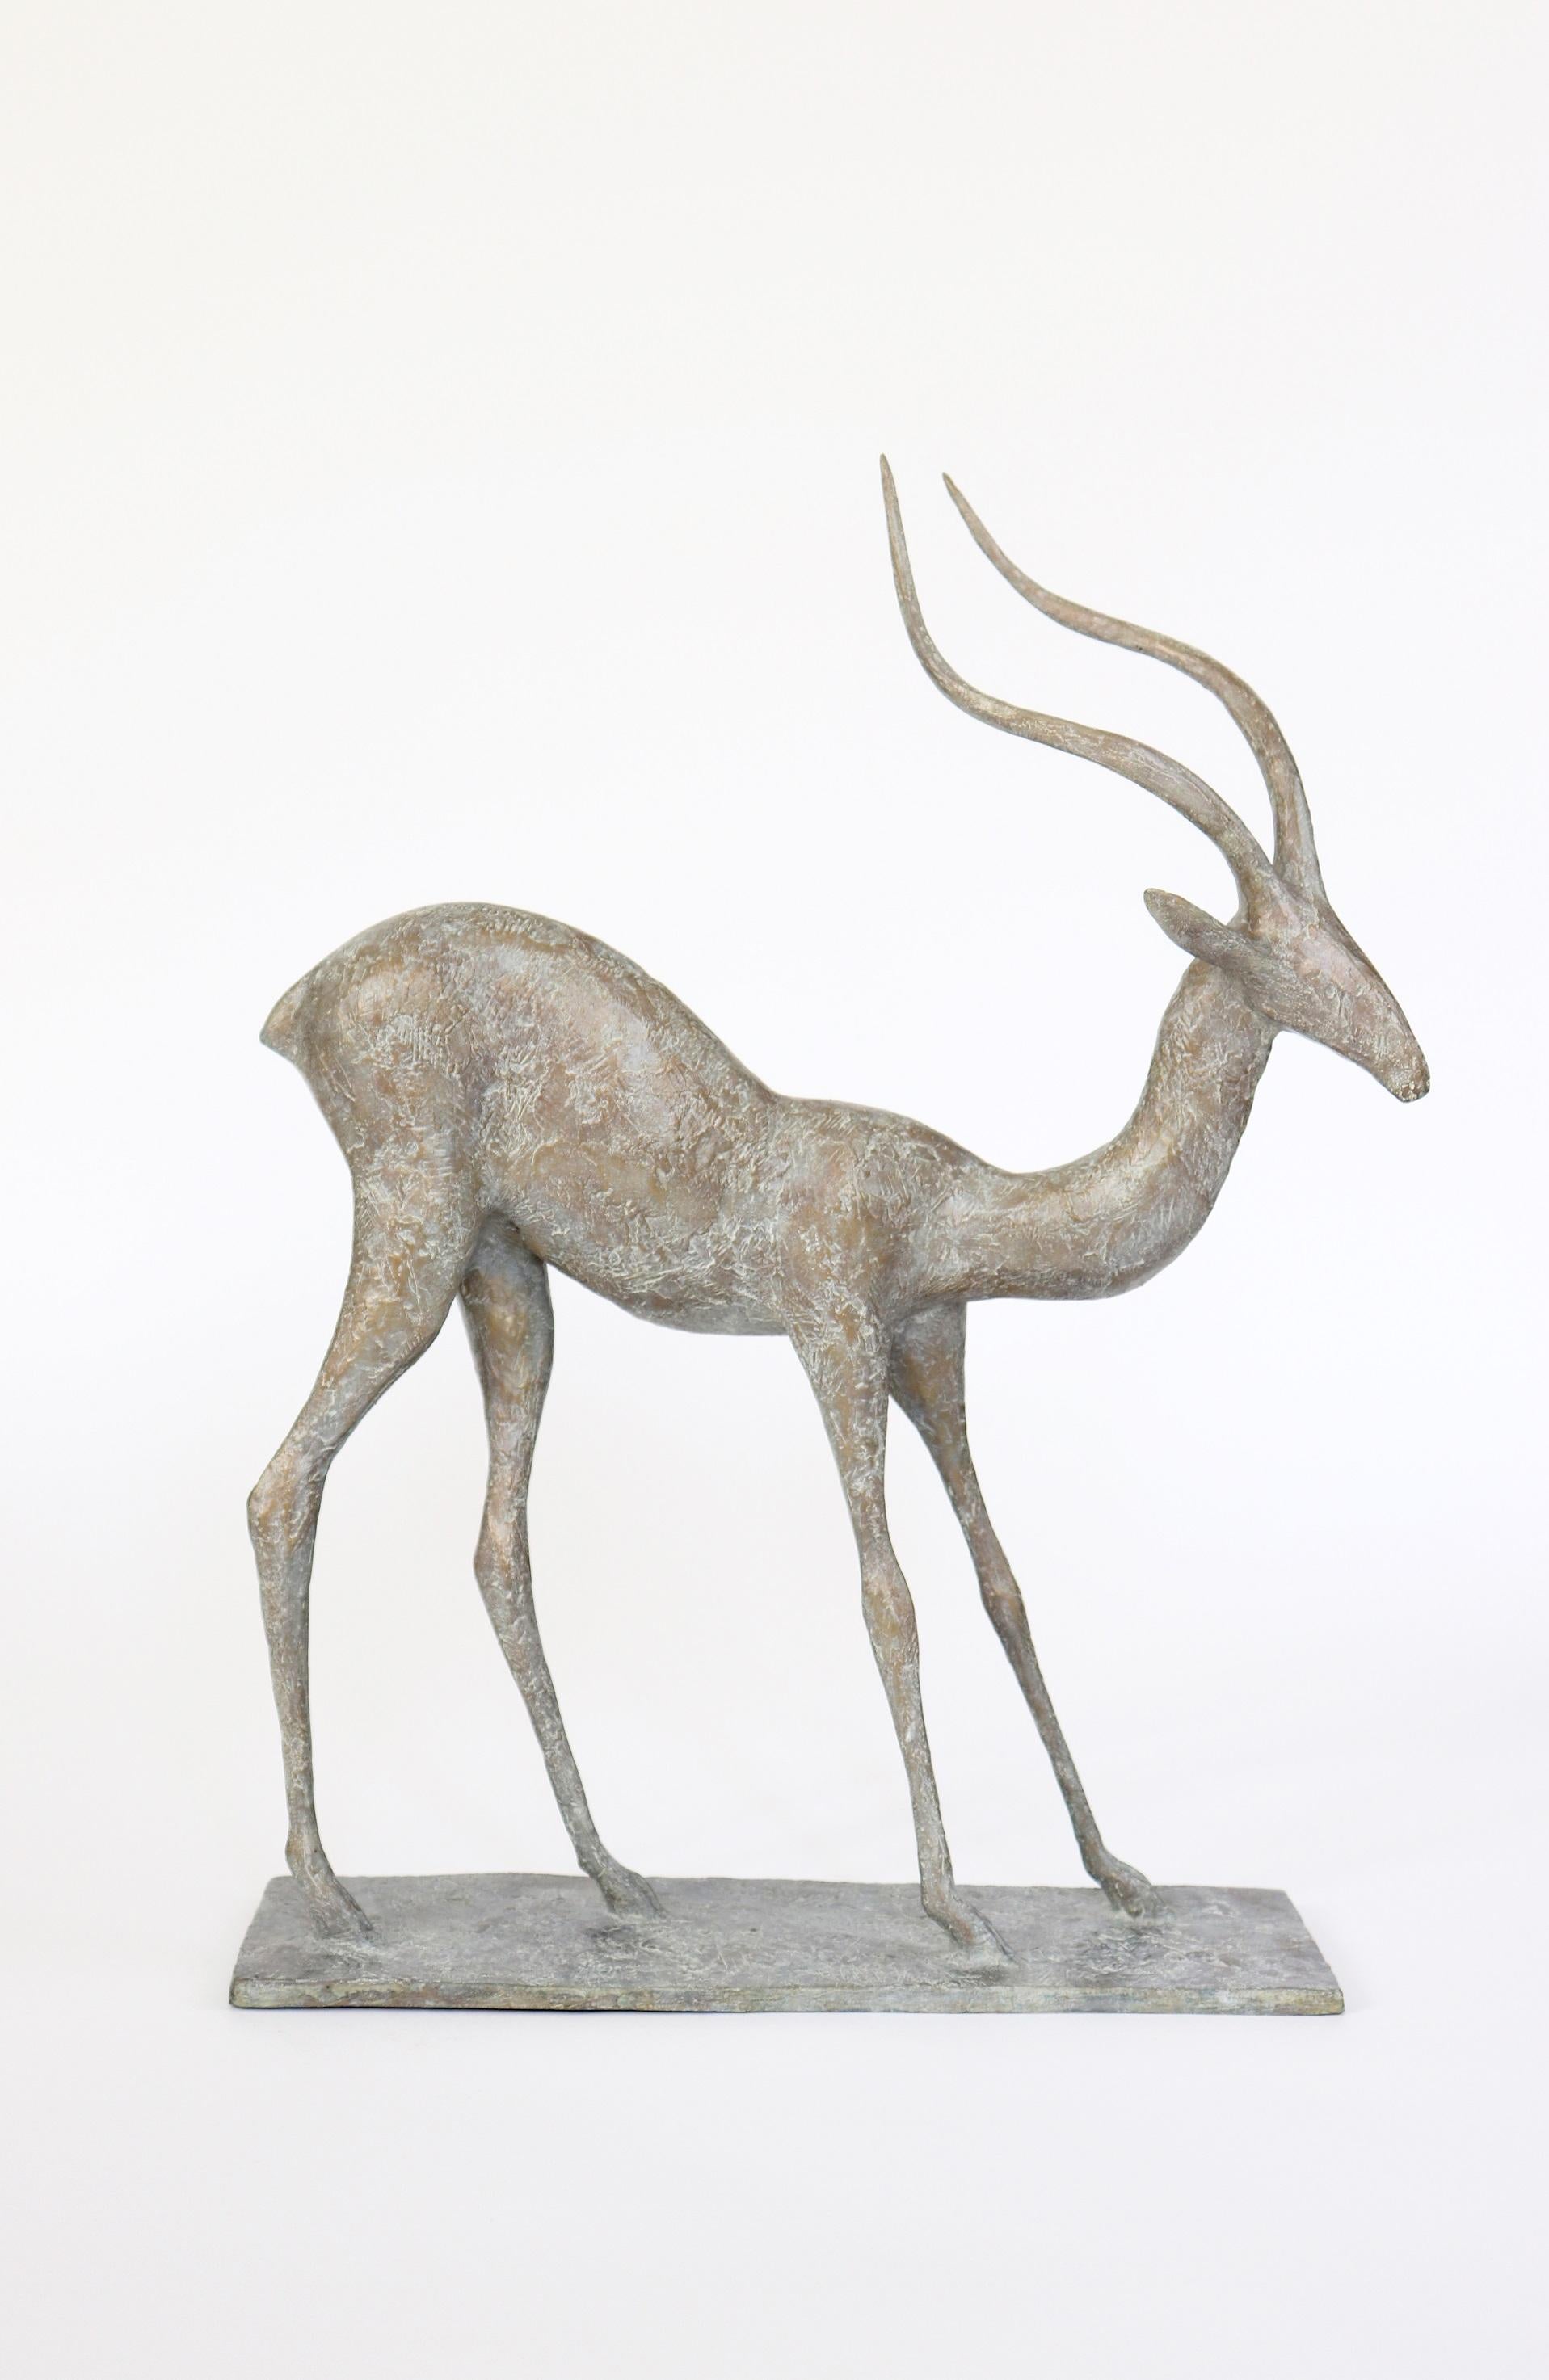 Gazelle III is a bronze sculpture by French contemporary artist Pierre Yermia, dimensions are 54 × 41 × 13 cm (21.3 × 16.1 × 5.1 in). 
The sculpture is signed and numbered, it is part of a limited edition of 8 editions + 4 artist’s proofs, and comes